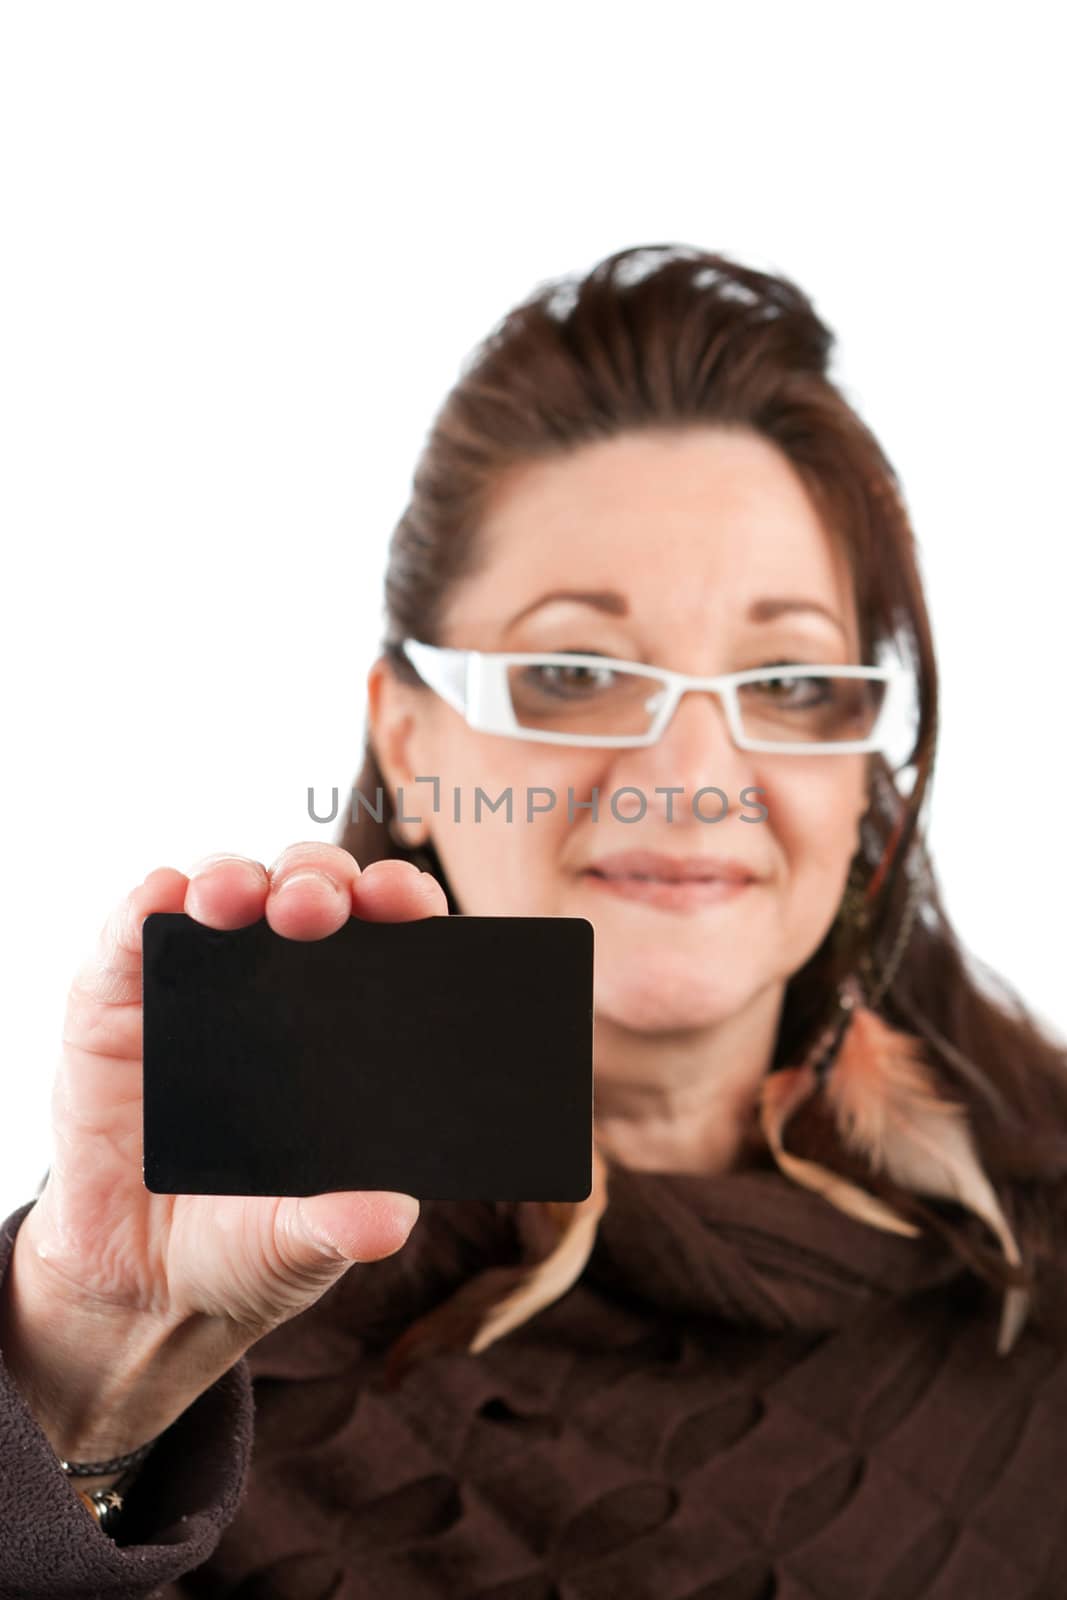 Brunette woman holding up a blank credit card business card shoppers club card or gift card of some sort with copyspace. Shallow depth of field.